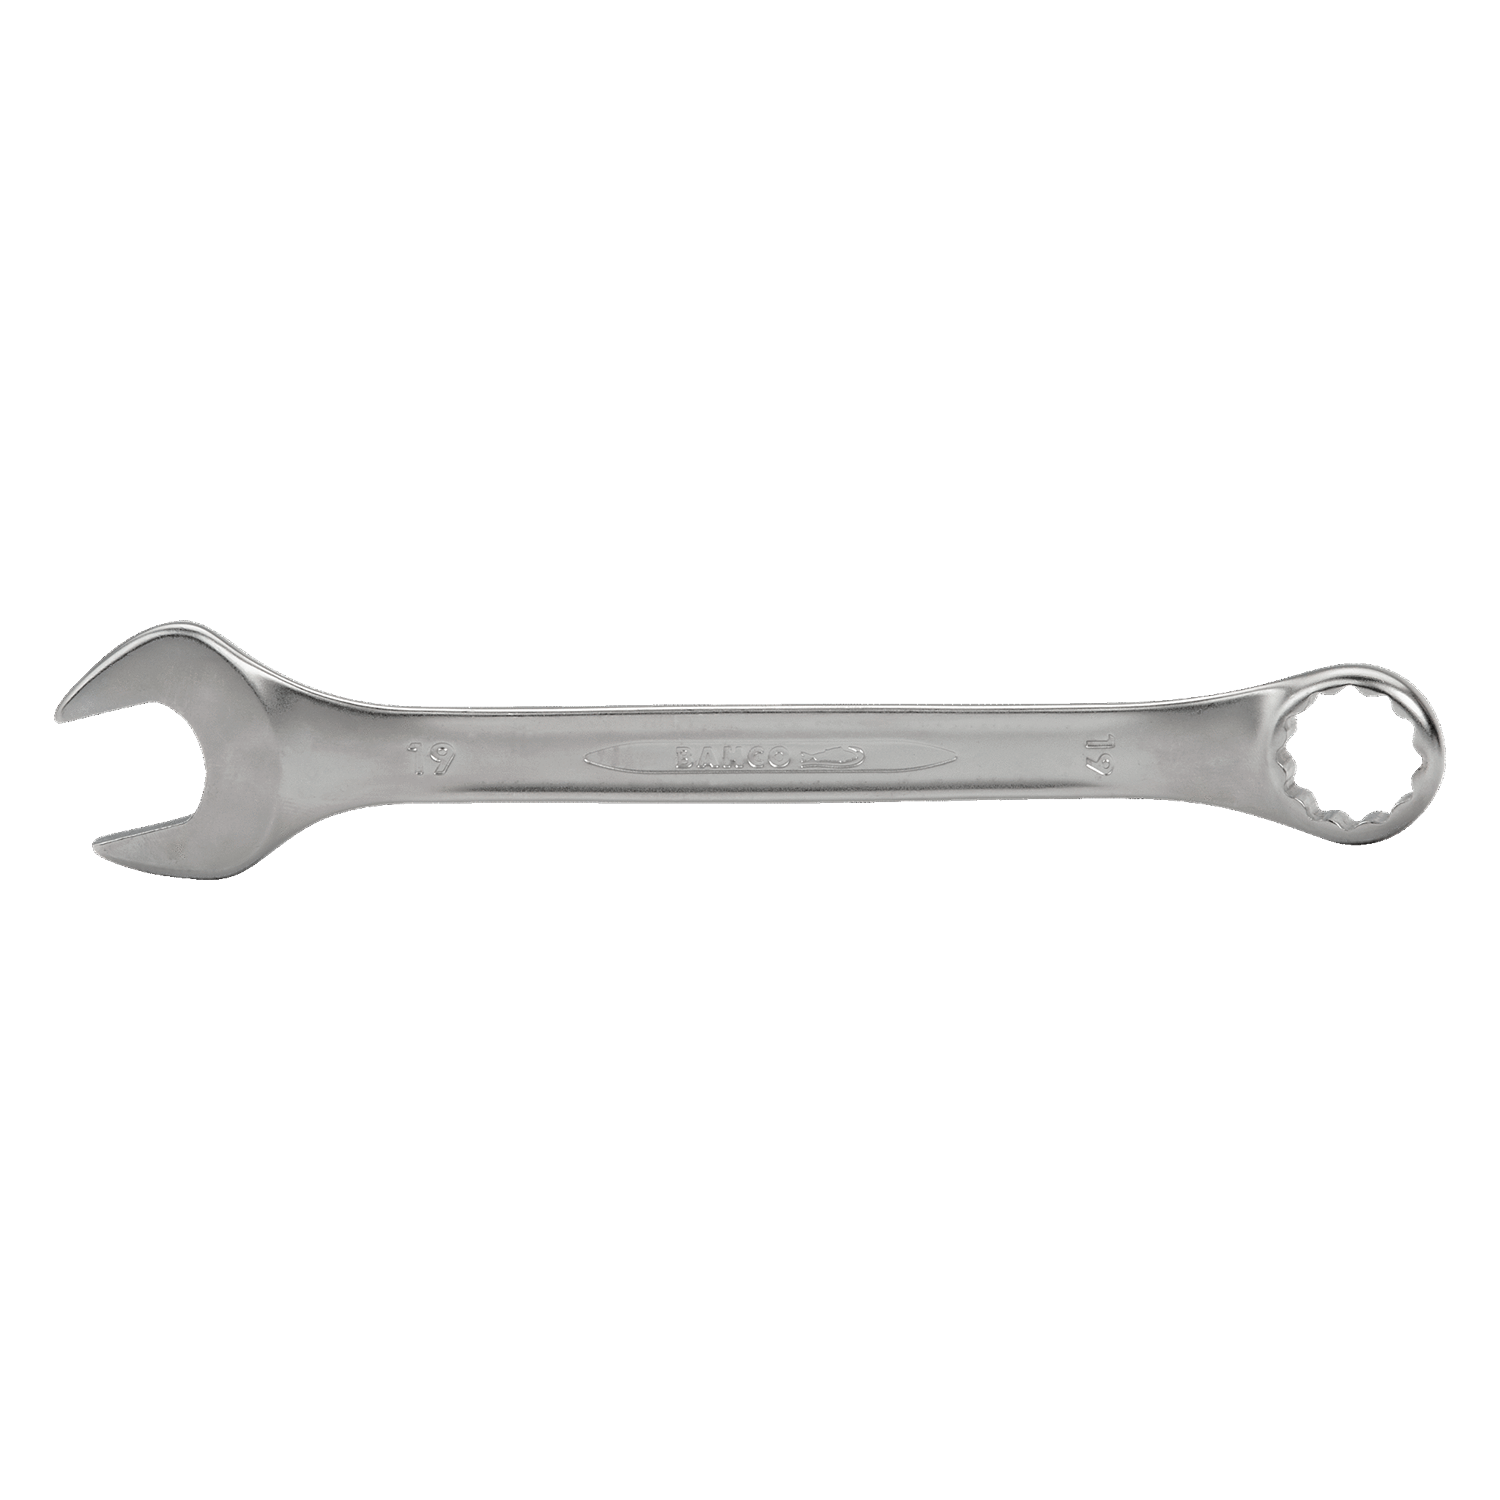 BAHCO 111M Metric Flat Combination Wrench With Chrome Finish - Premium Combination Wrench from BAHCO - Shop now at Yew Aik.